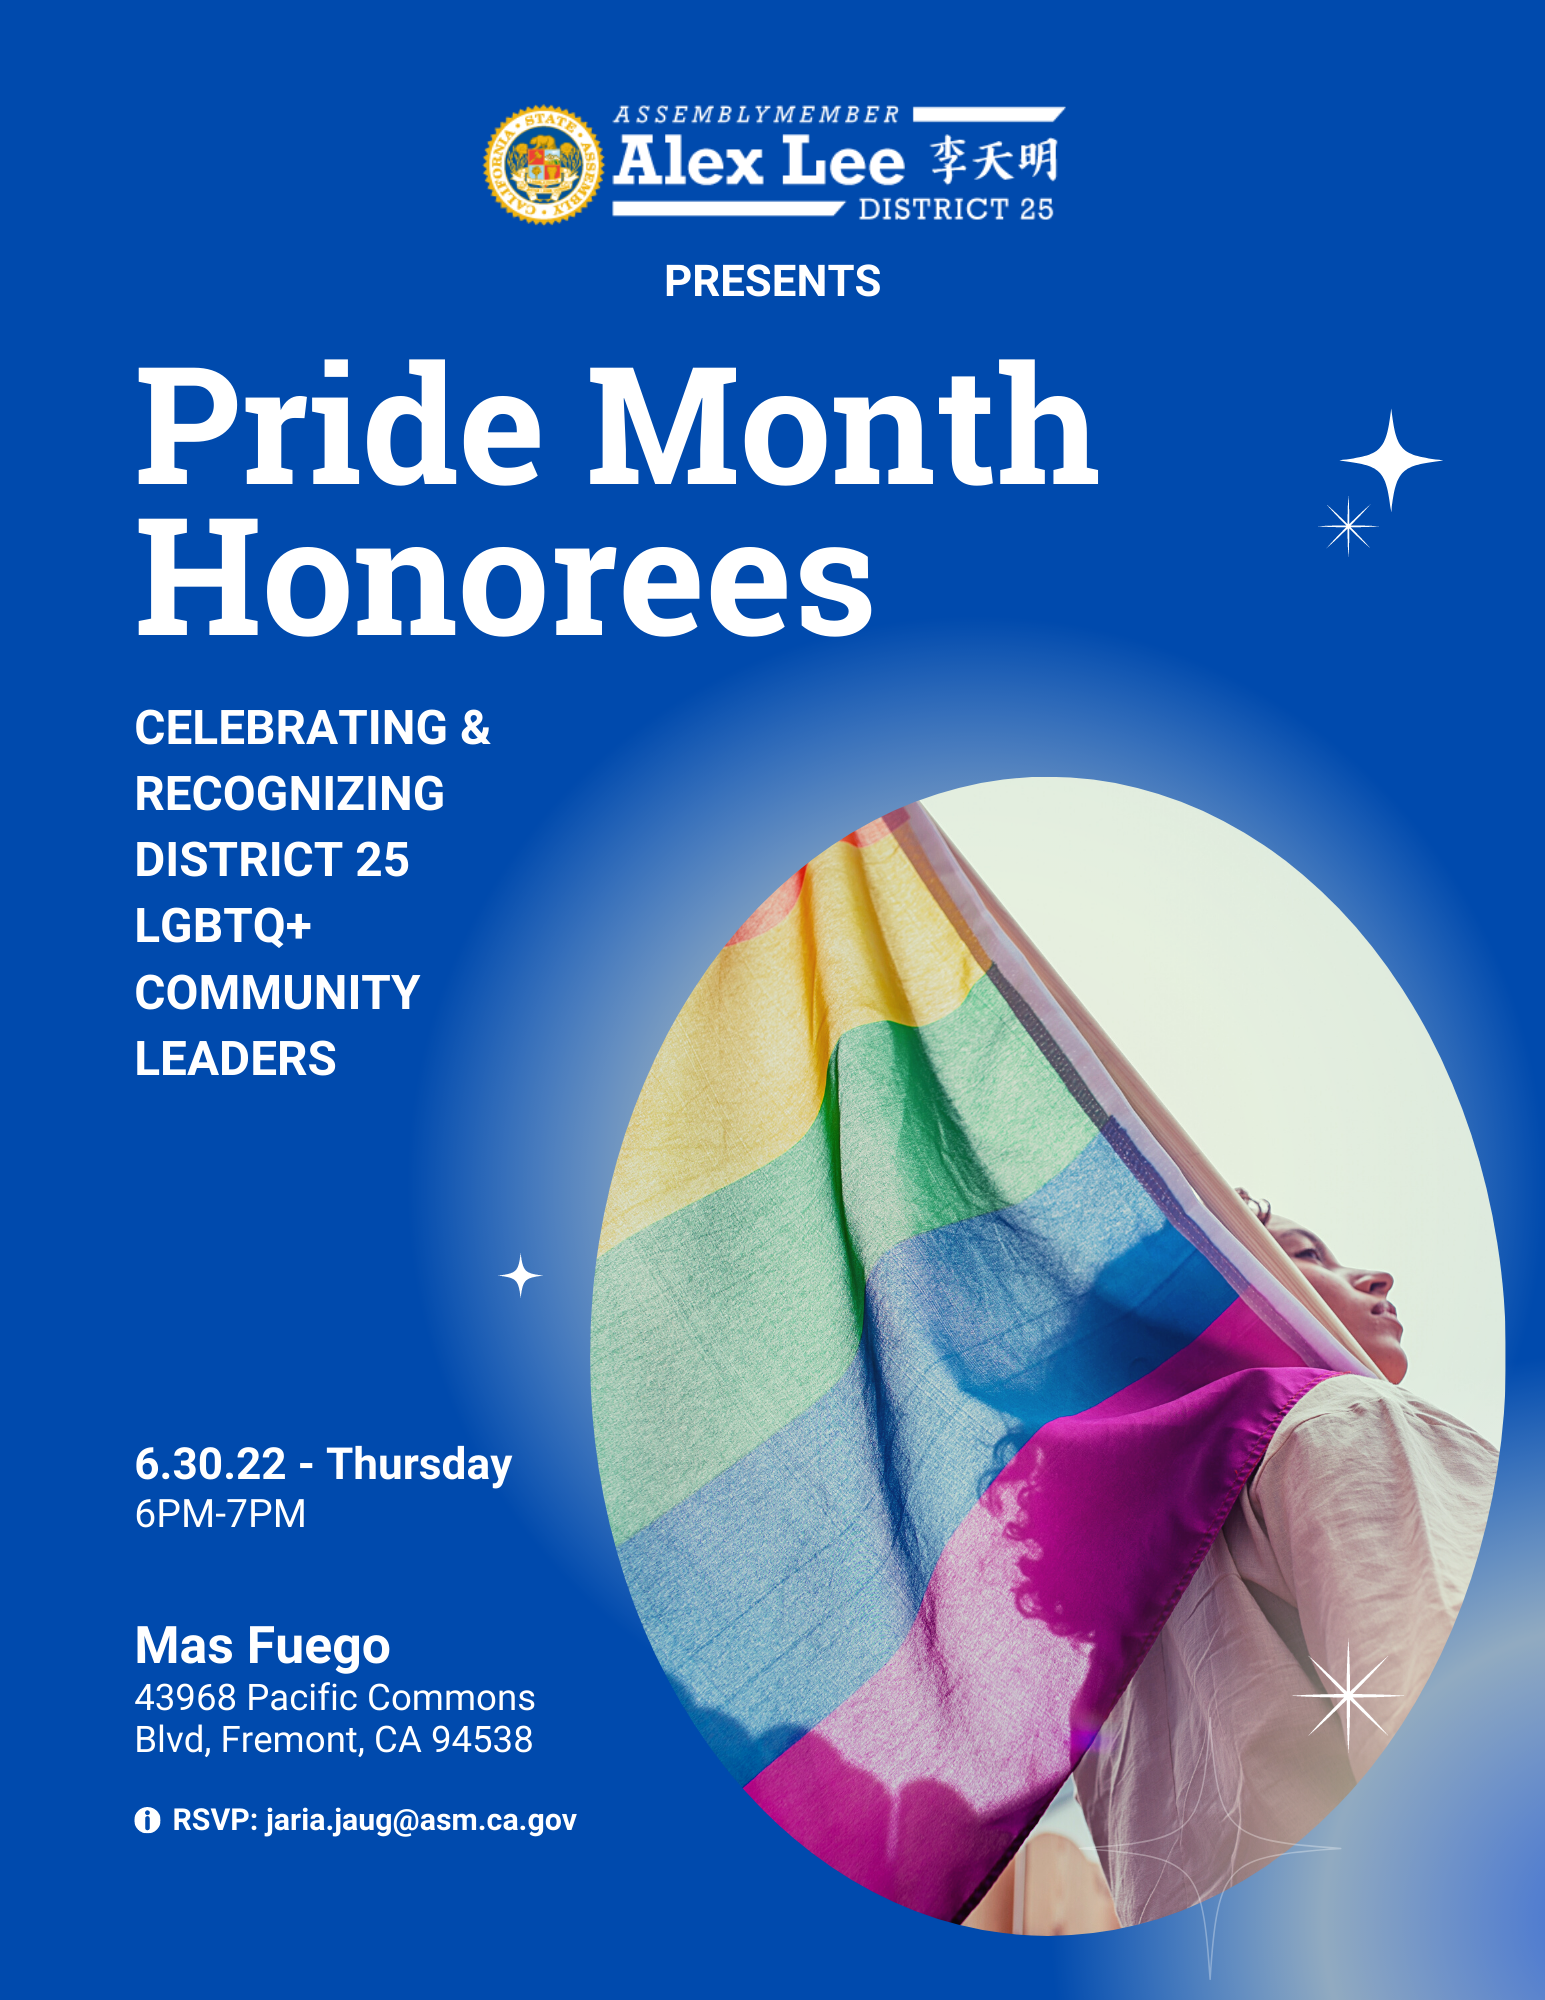 Pride Month Honorees - Celebrating and Recognizing District 25 LGBTQ+ Community members 